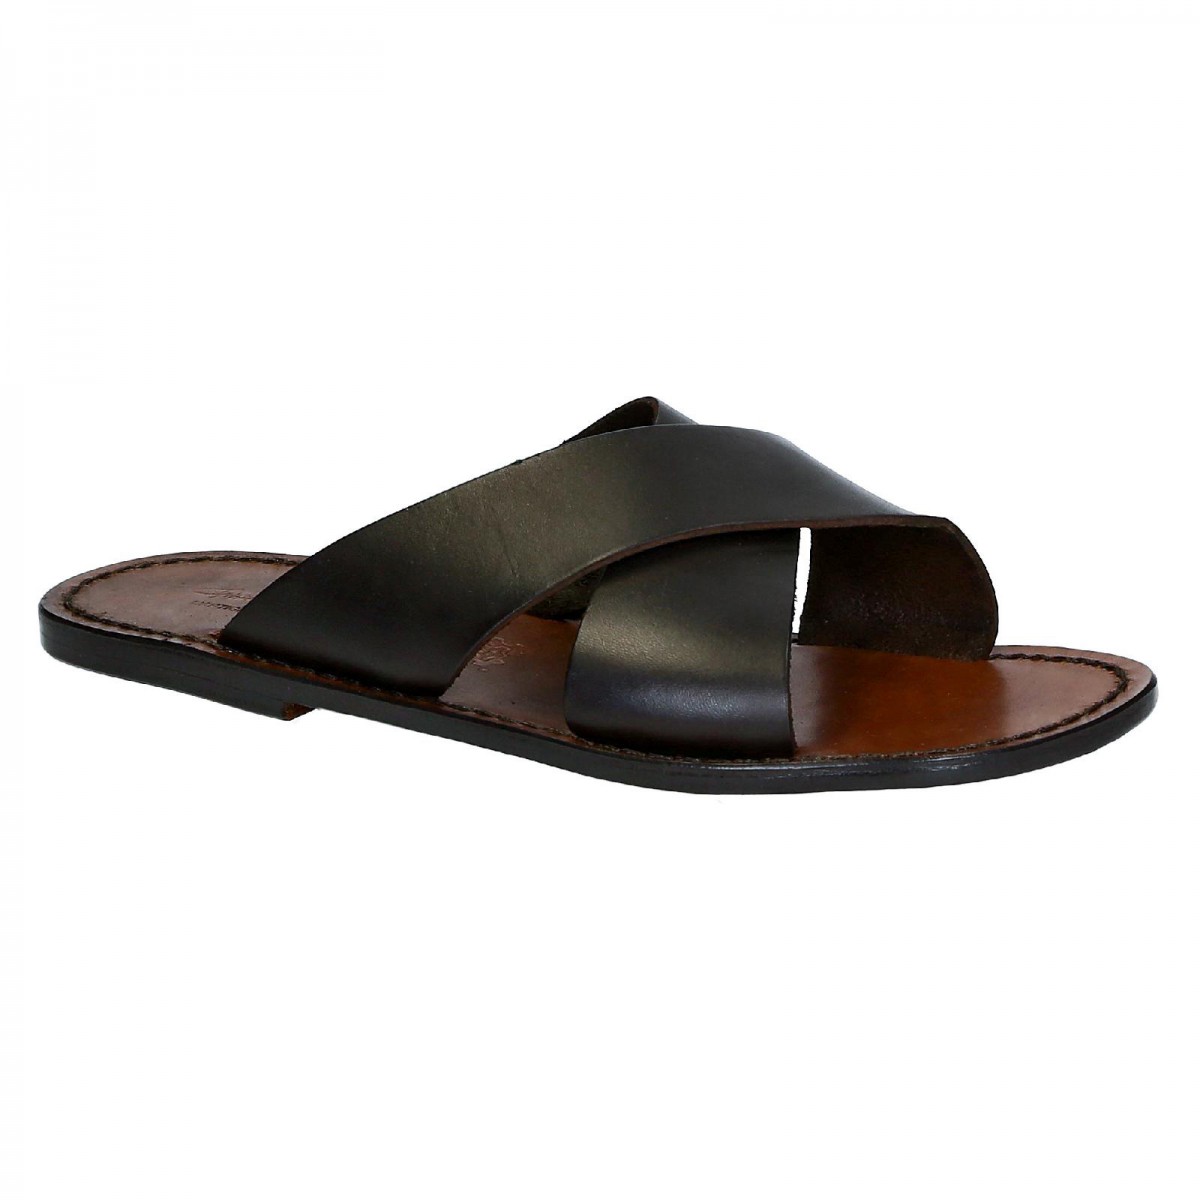 Mens Leather Slippers With Leather Soles | lupon.gov.ph